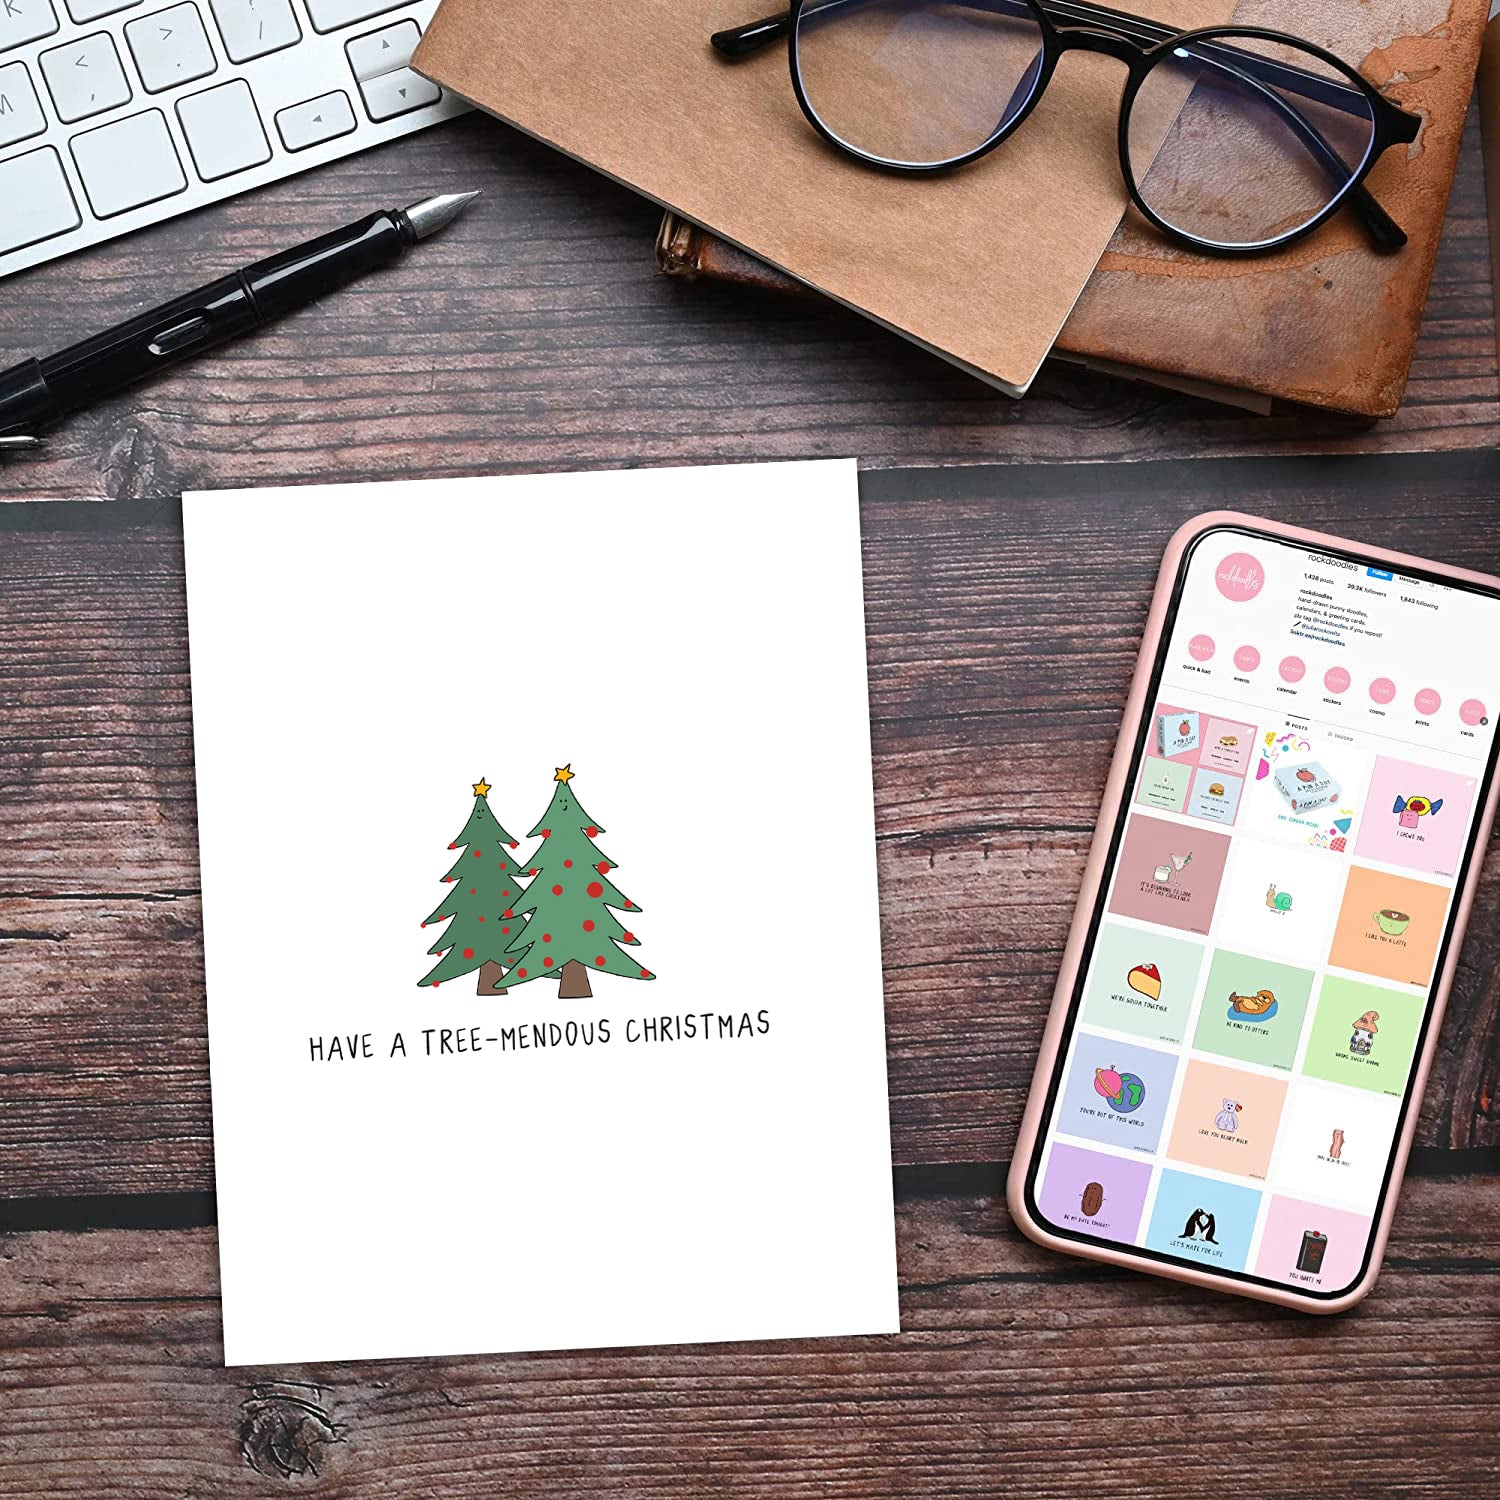 A rockdoodles Have A Tree-Mendous Christmas Card on a desk next to a phone and glasses.